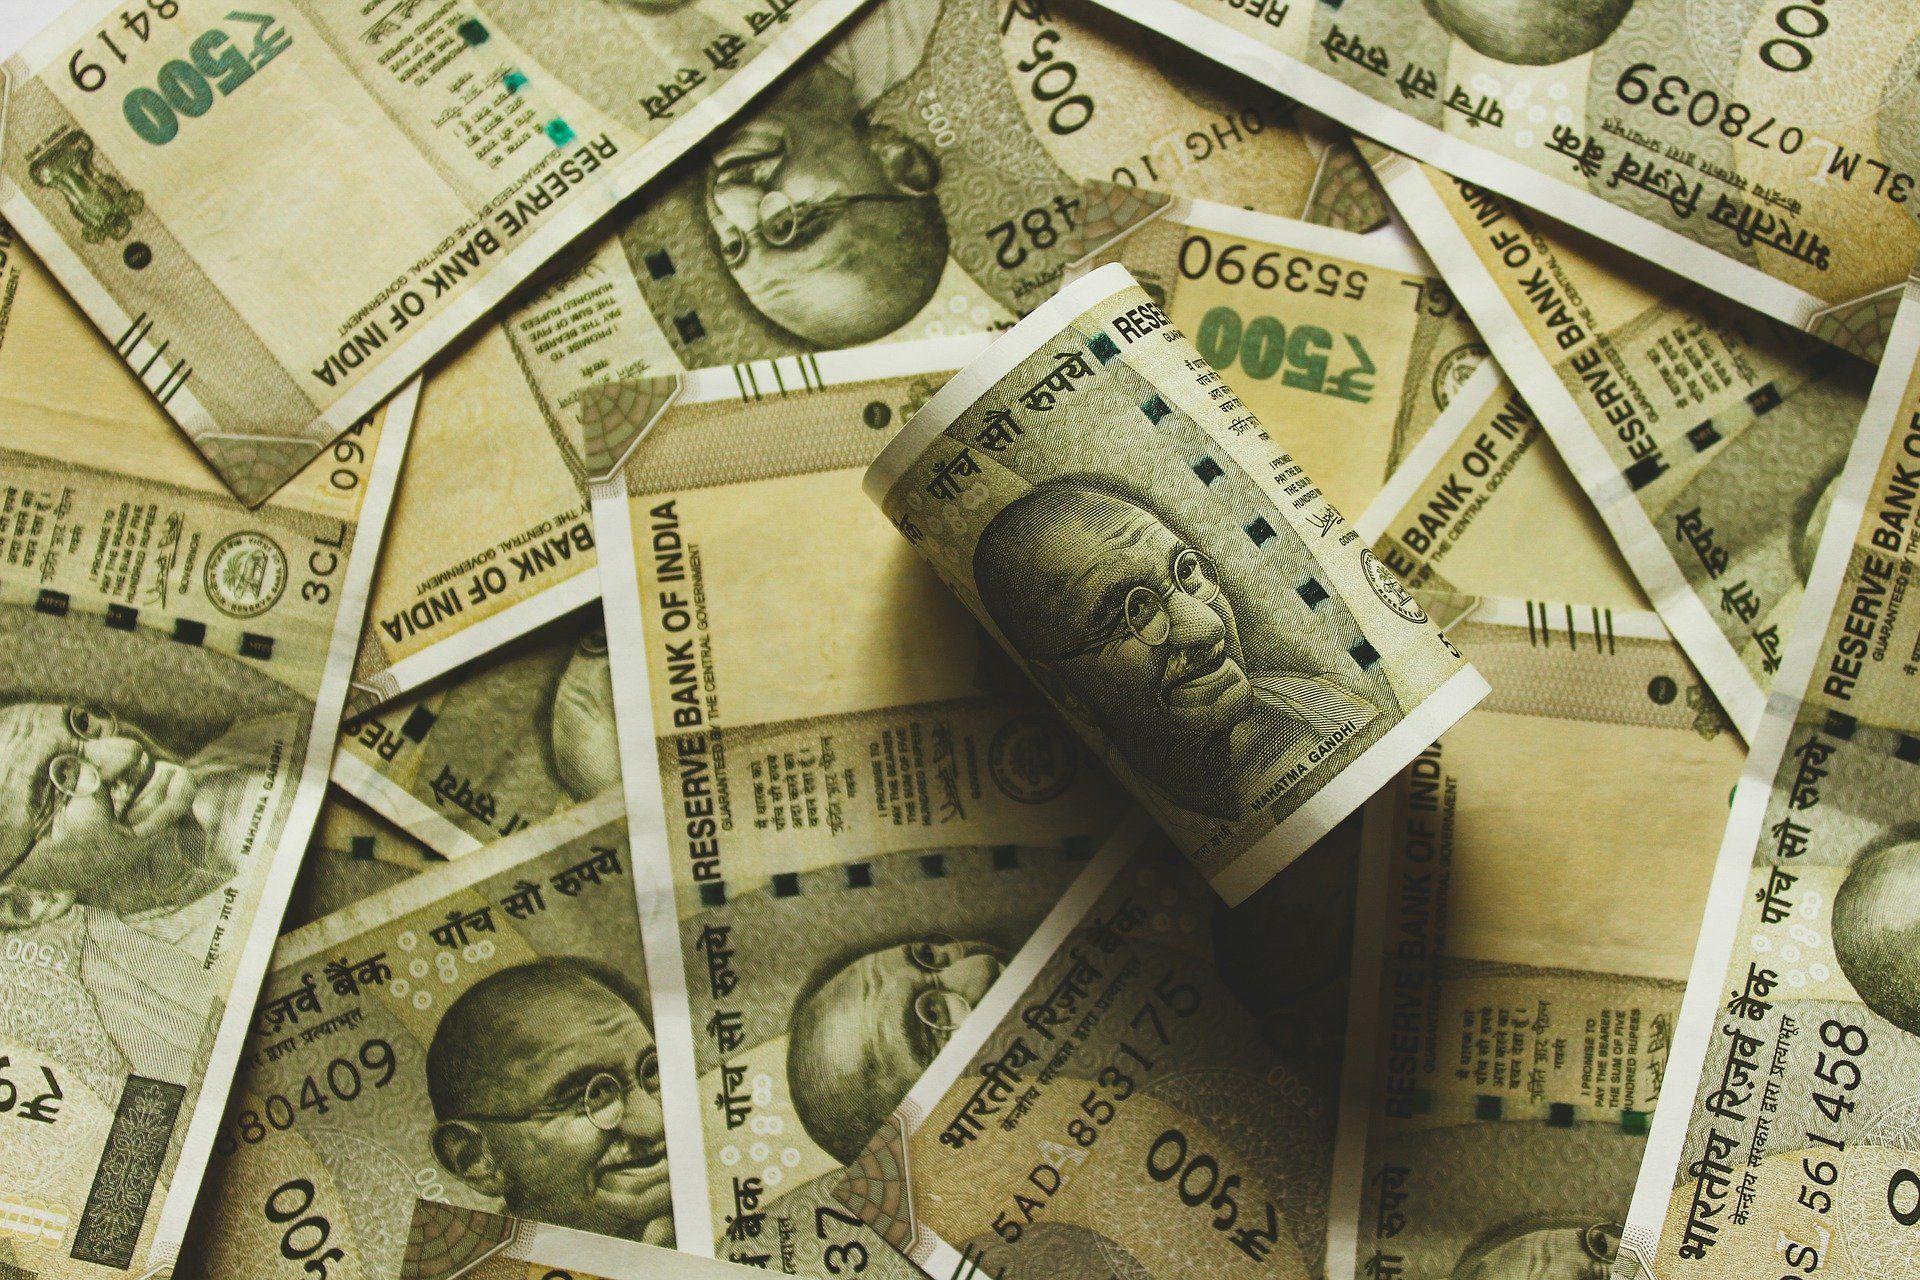 India approves 66 FDI proposals worth Rs 13,624 crore from its neighbours